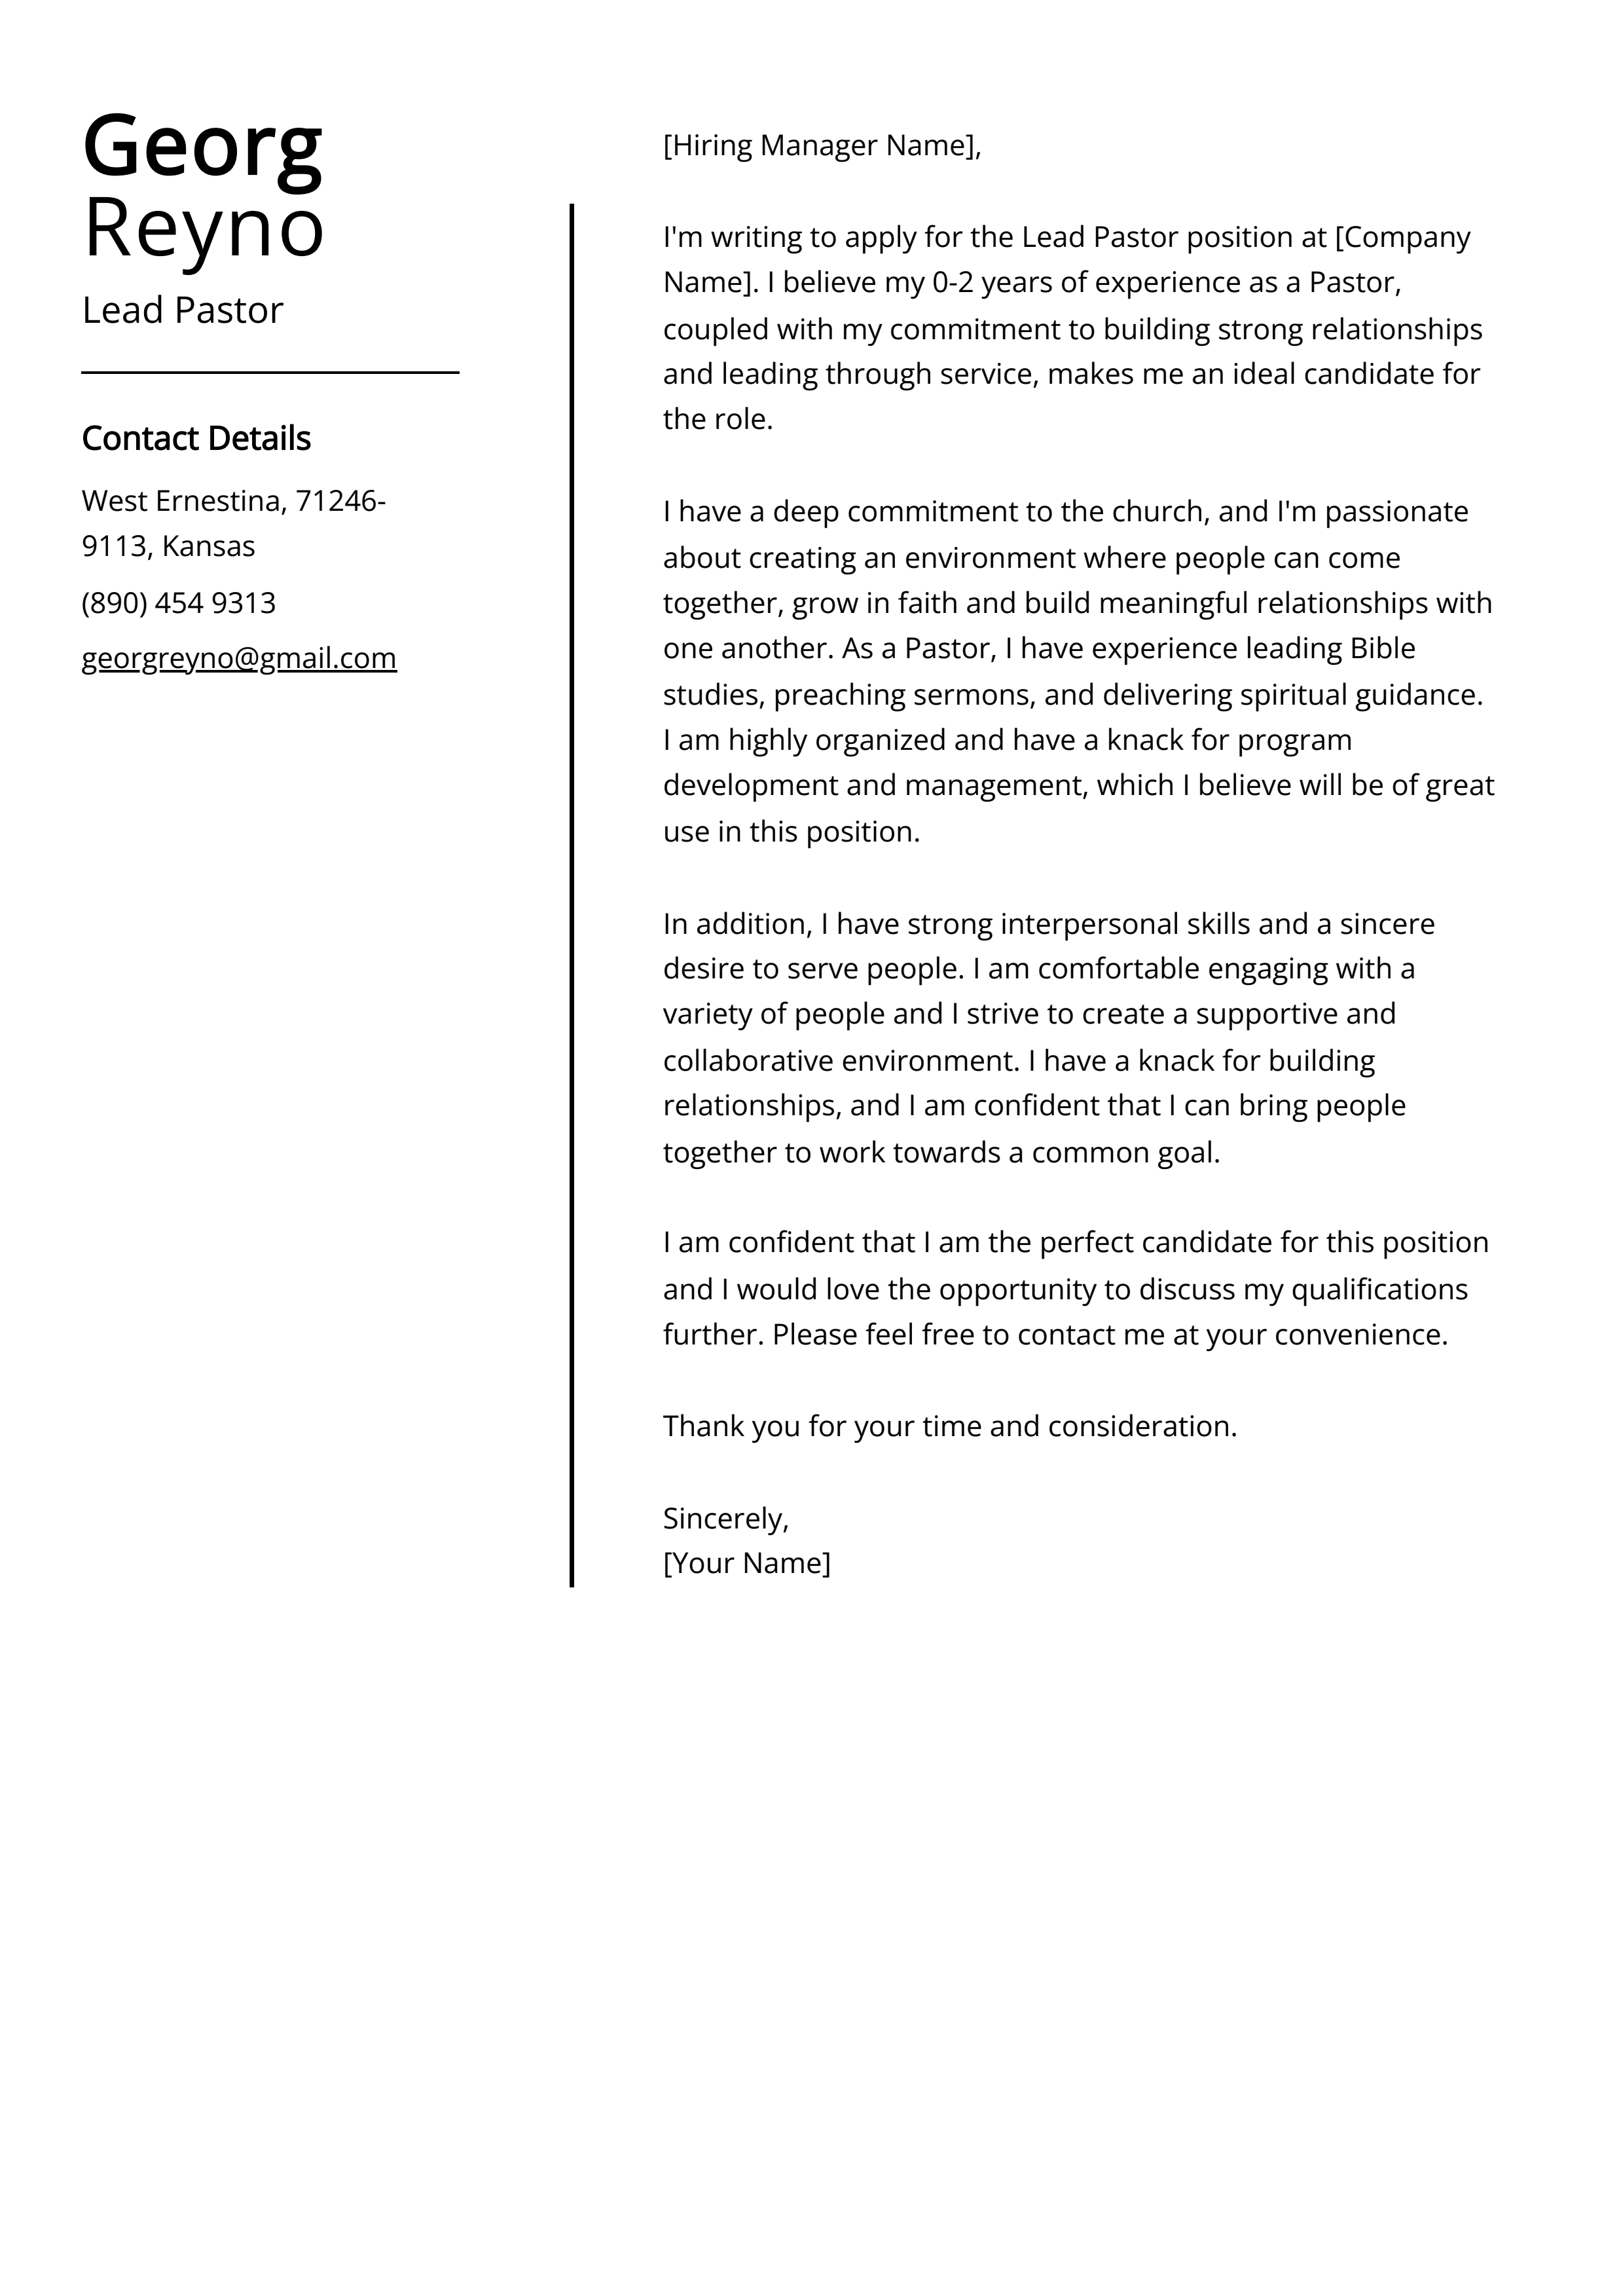 Lead Pastor Cover Letter Example